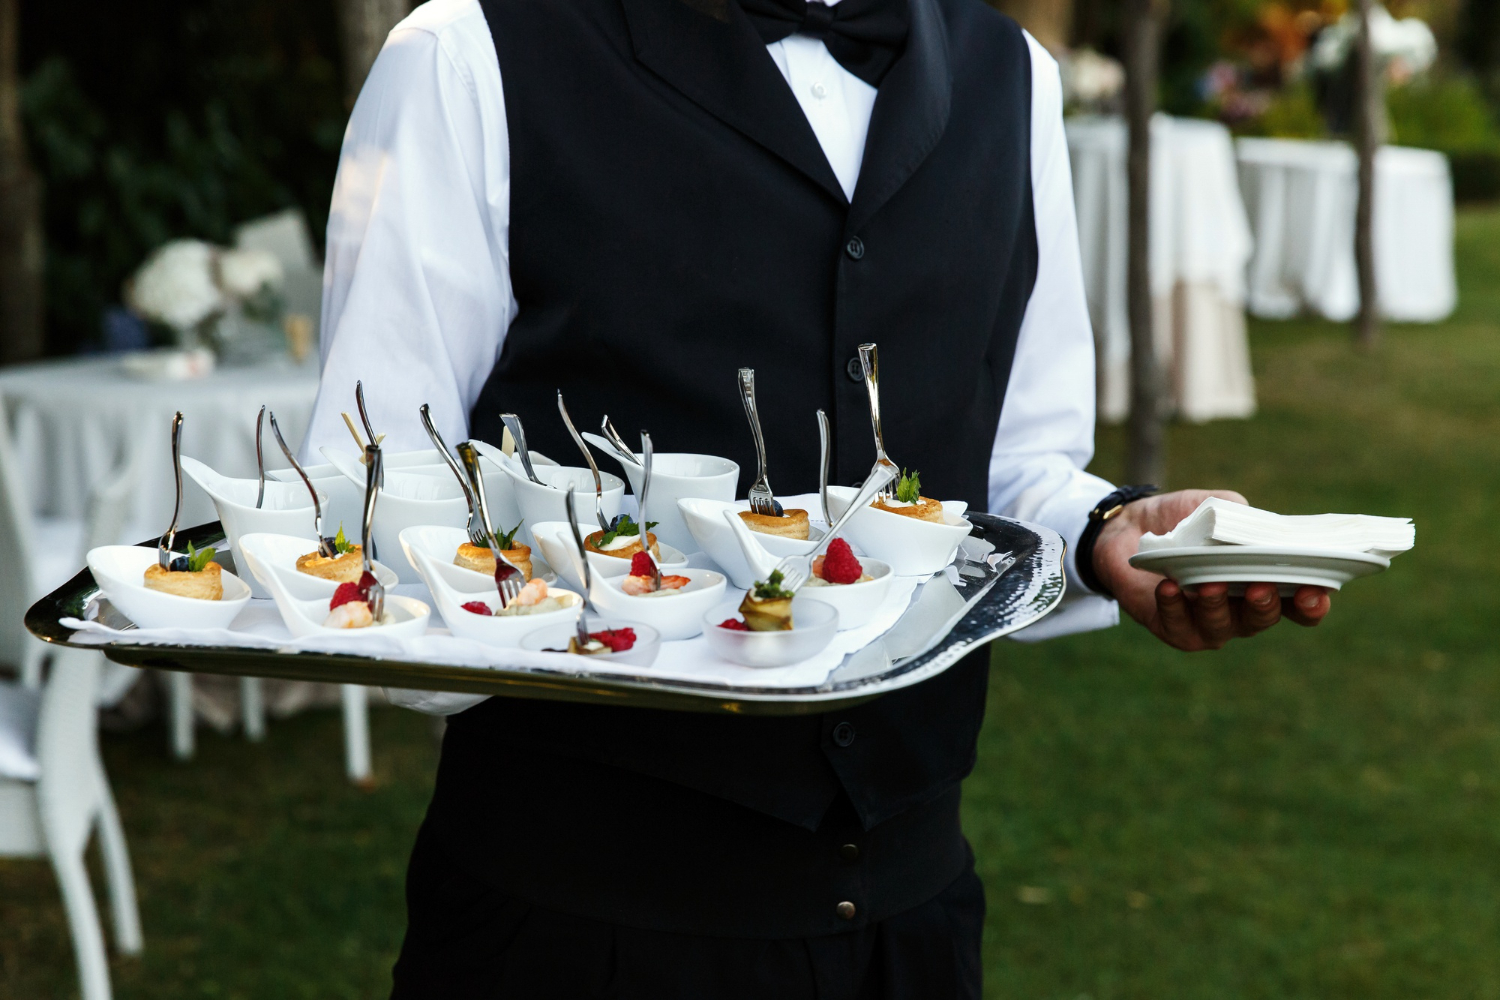 Waiter providing catering services at wedding